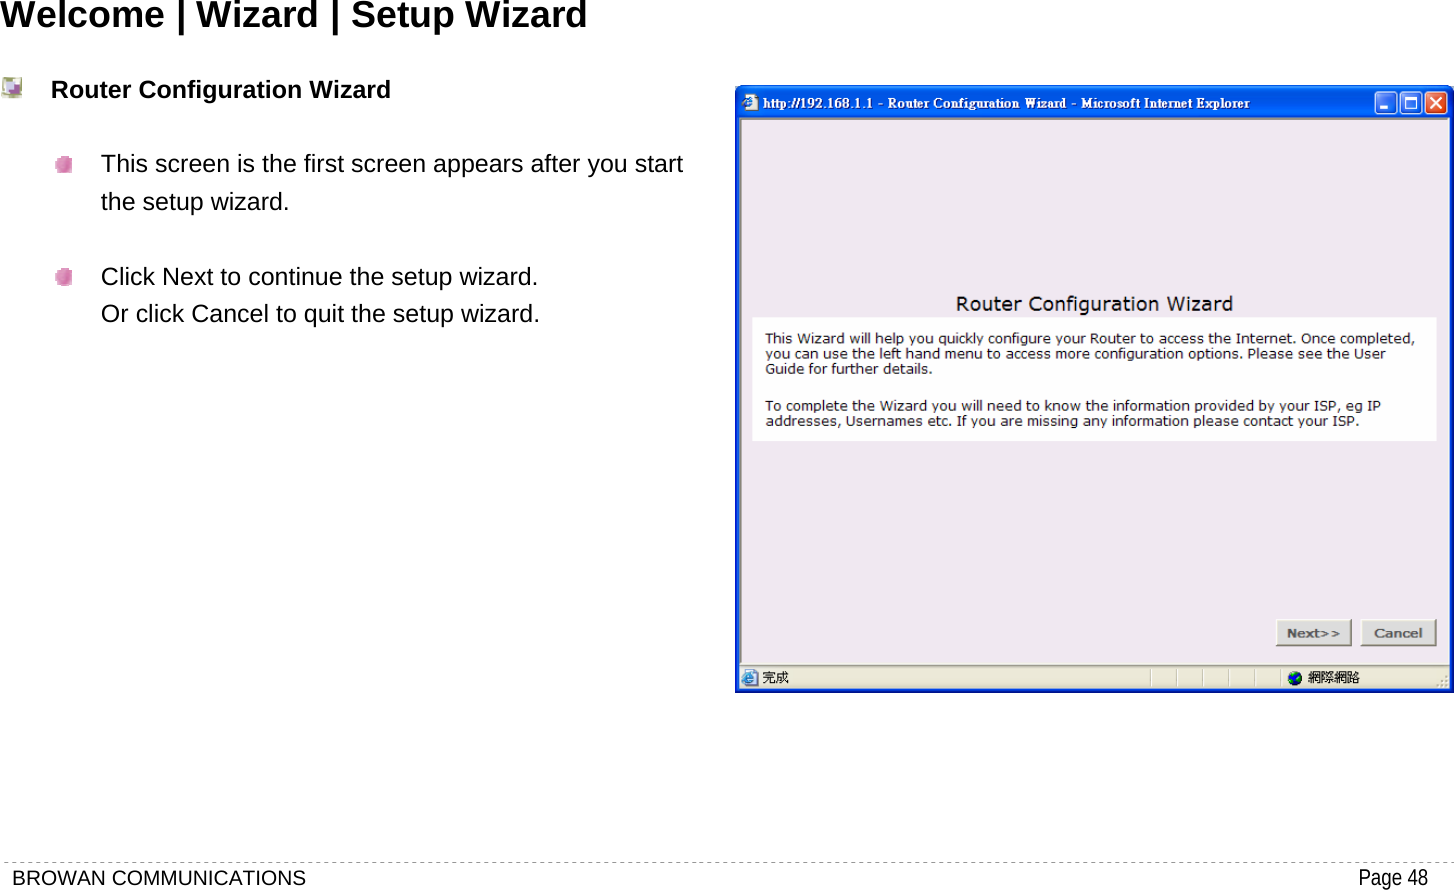 BROWAN COMMUNICATIONS                                                                                           Page 48  Welcome | Wizard | Setup Wizard    Router Configuration Wizard    This screen is the first screen appears after you start the setup wizard.    Click Next to continue the setup wizard. Or click Cancel to quit the setup wizard.              